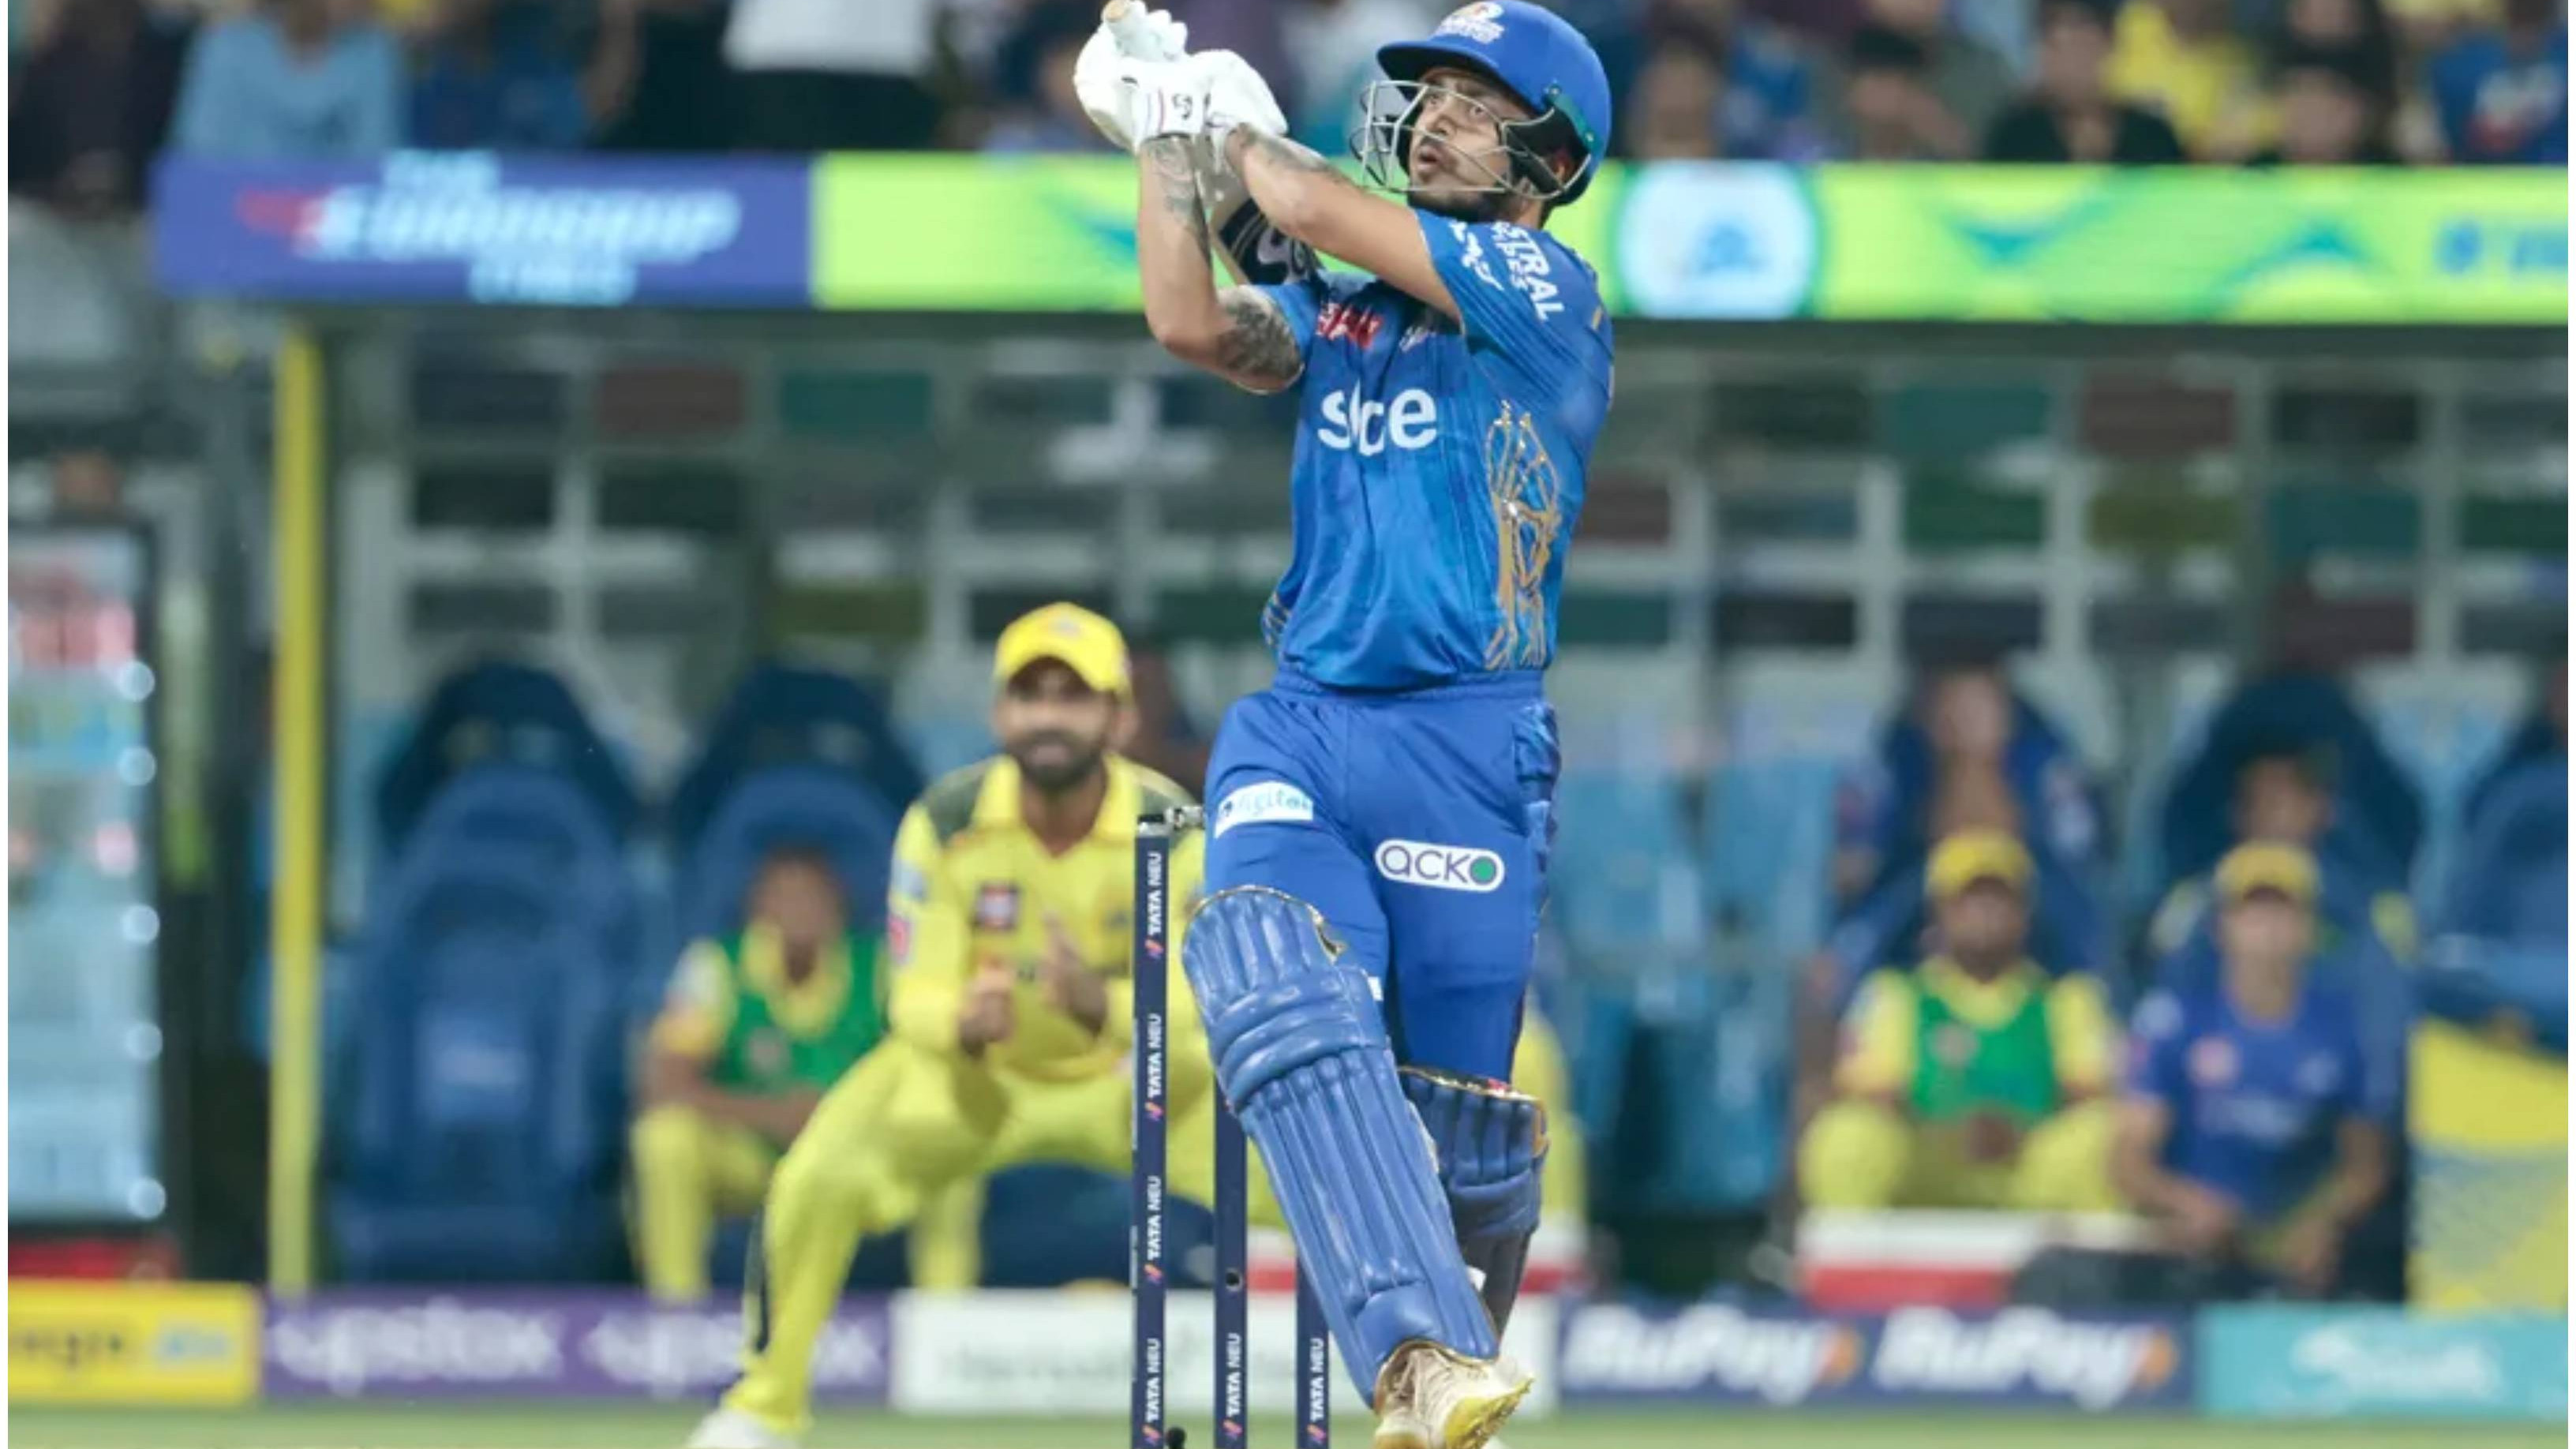 IPL 2023: “We are ready for any conditions actually,” says Ishan Kishan ahead of MI’s clash against CSK at Chepauk